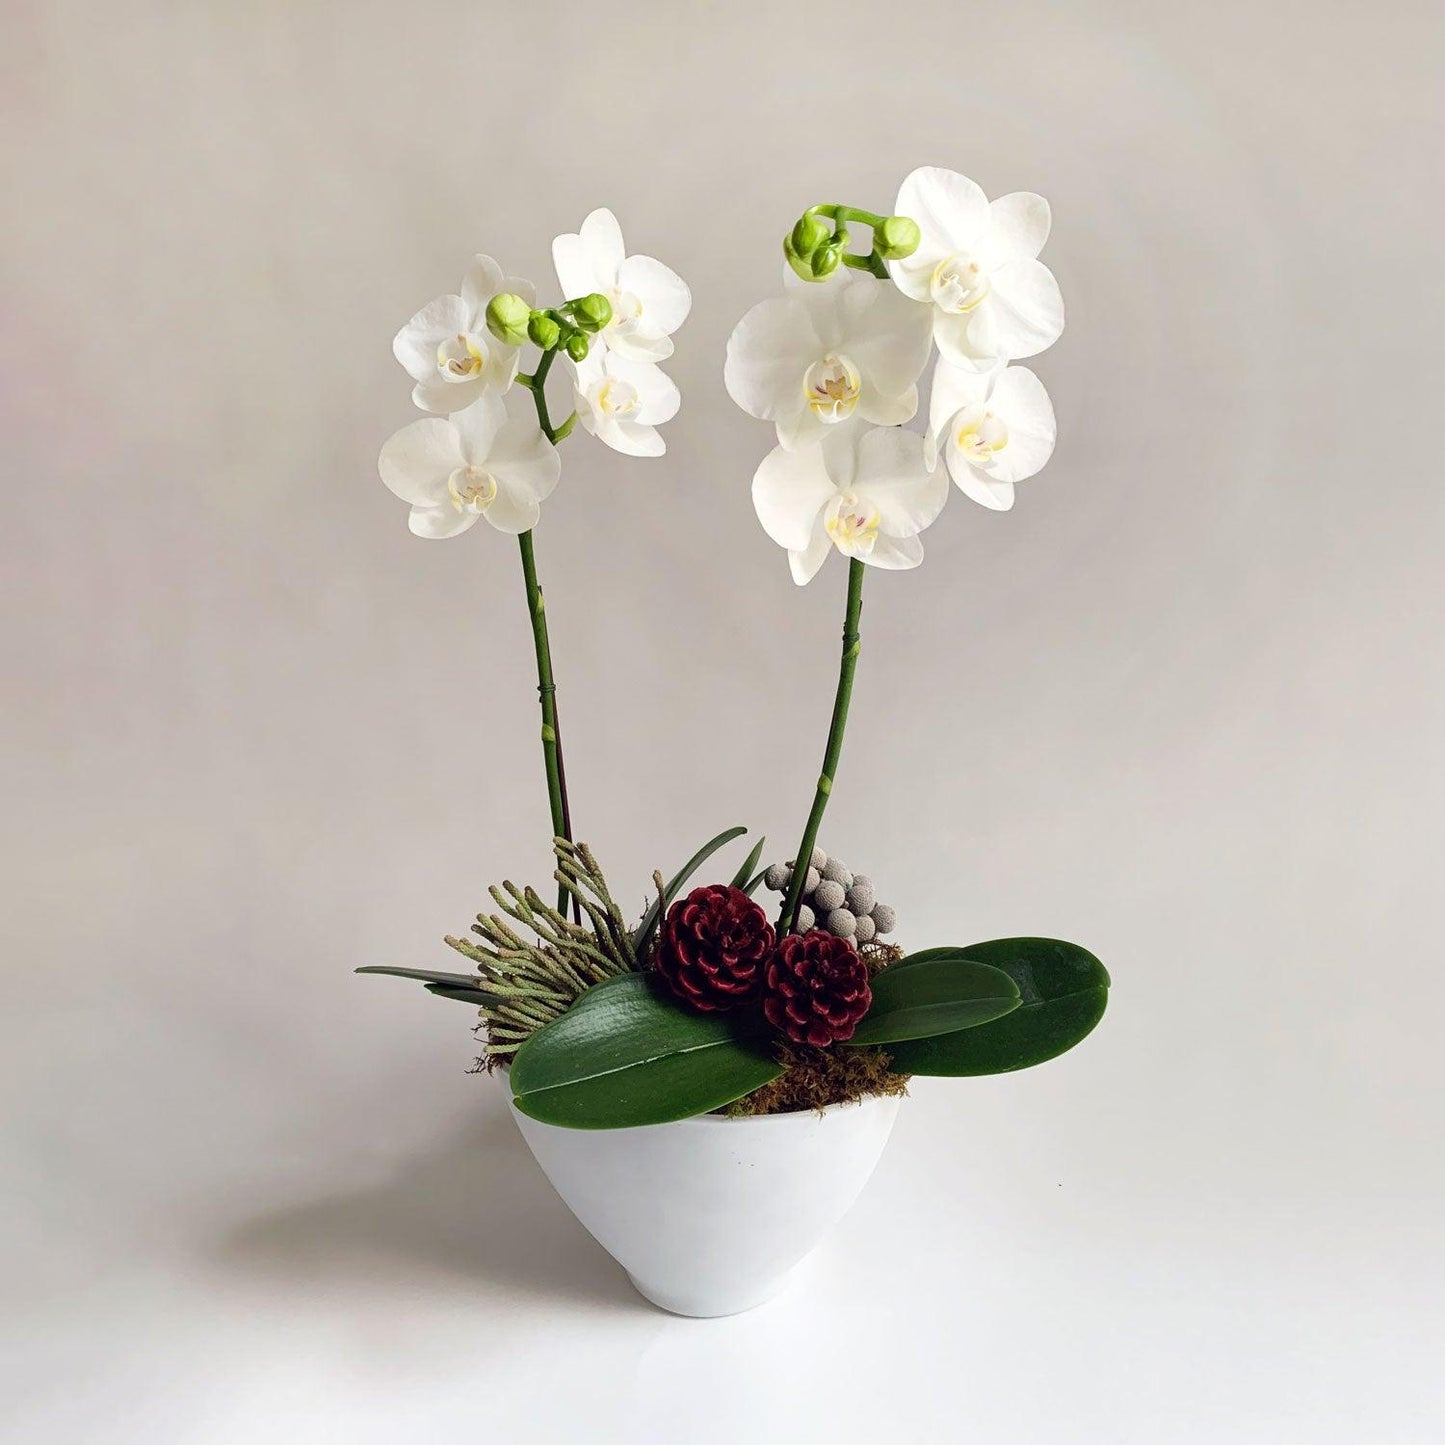 image of white orchid flowers with green buds and stems against a light grey background. Order online for flowers from the best florist in Toronto near you.